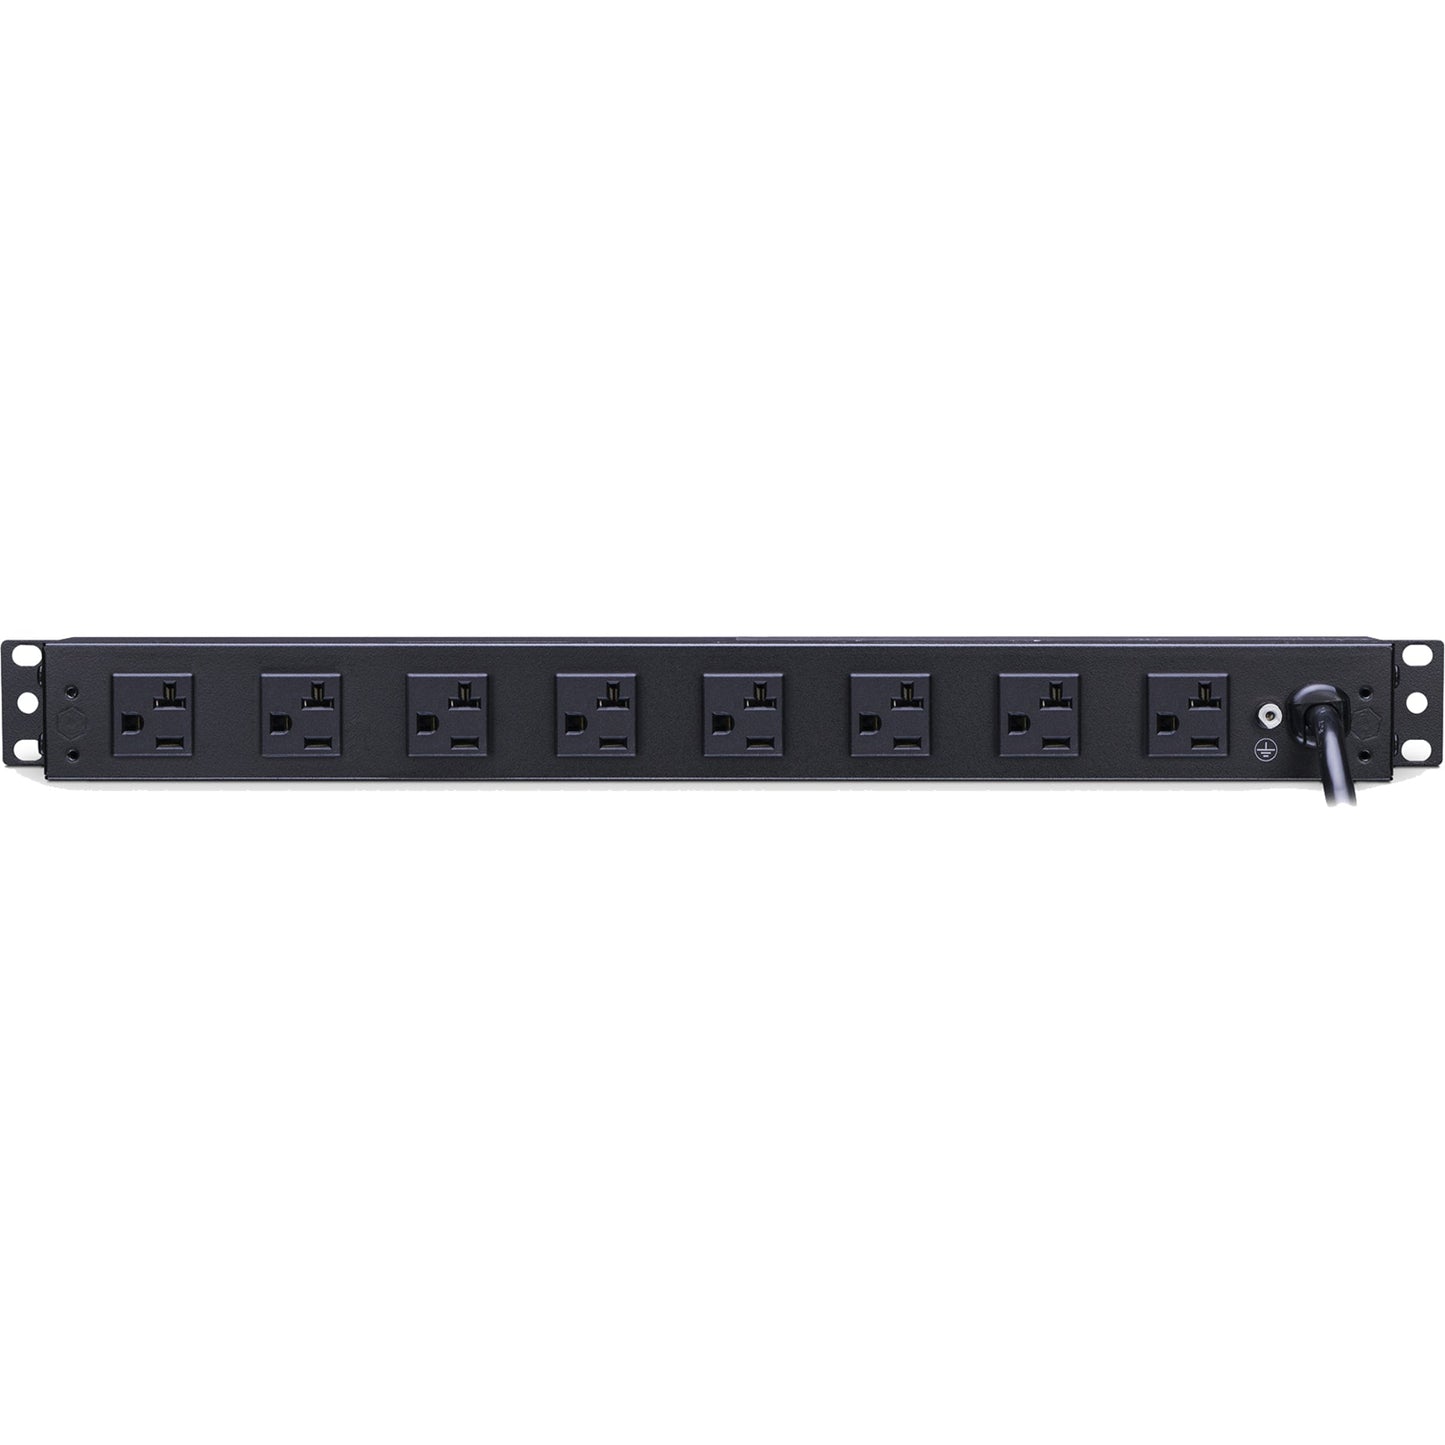 CyberPower RKBS20S2F8R Rackbar 10 - Outlet Surge with 1800 J